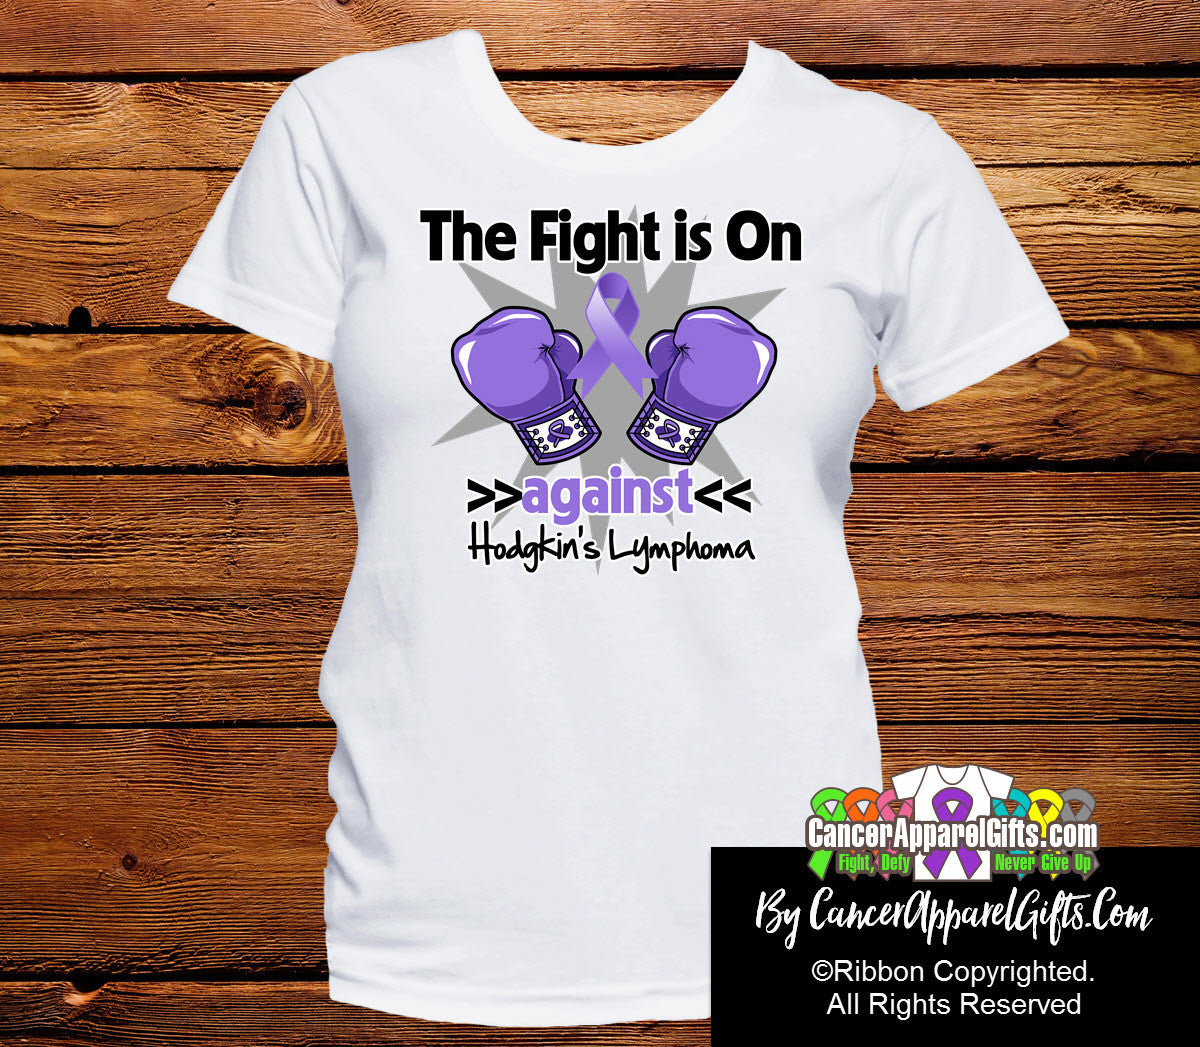 Hodgkins Lymphoma The Fight is On Ladies Shirts